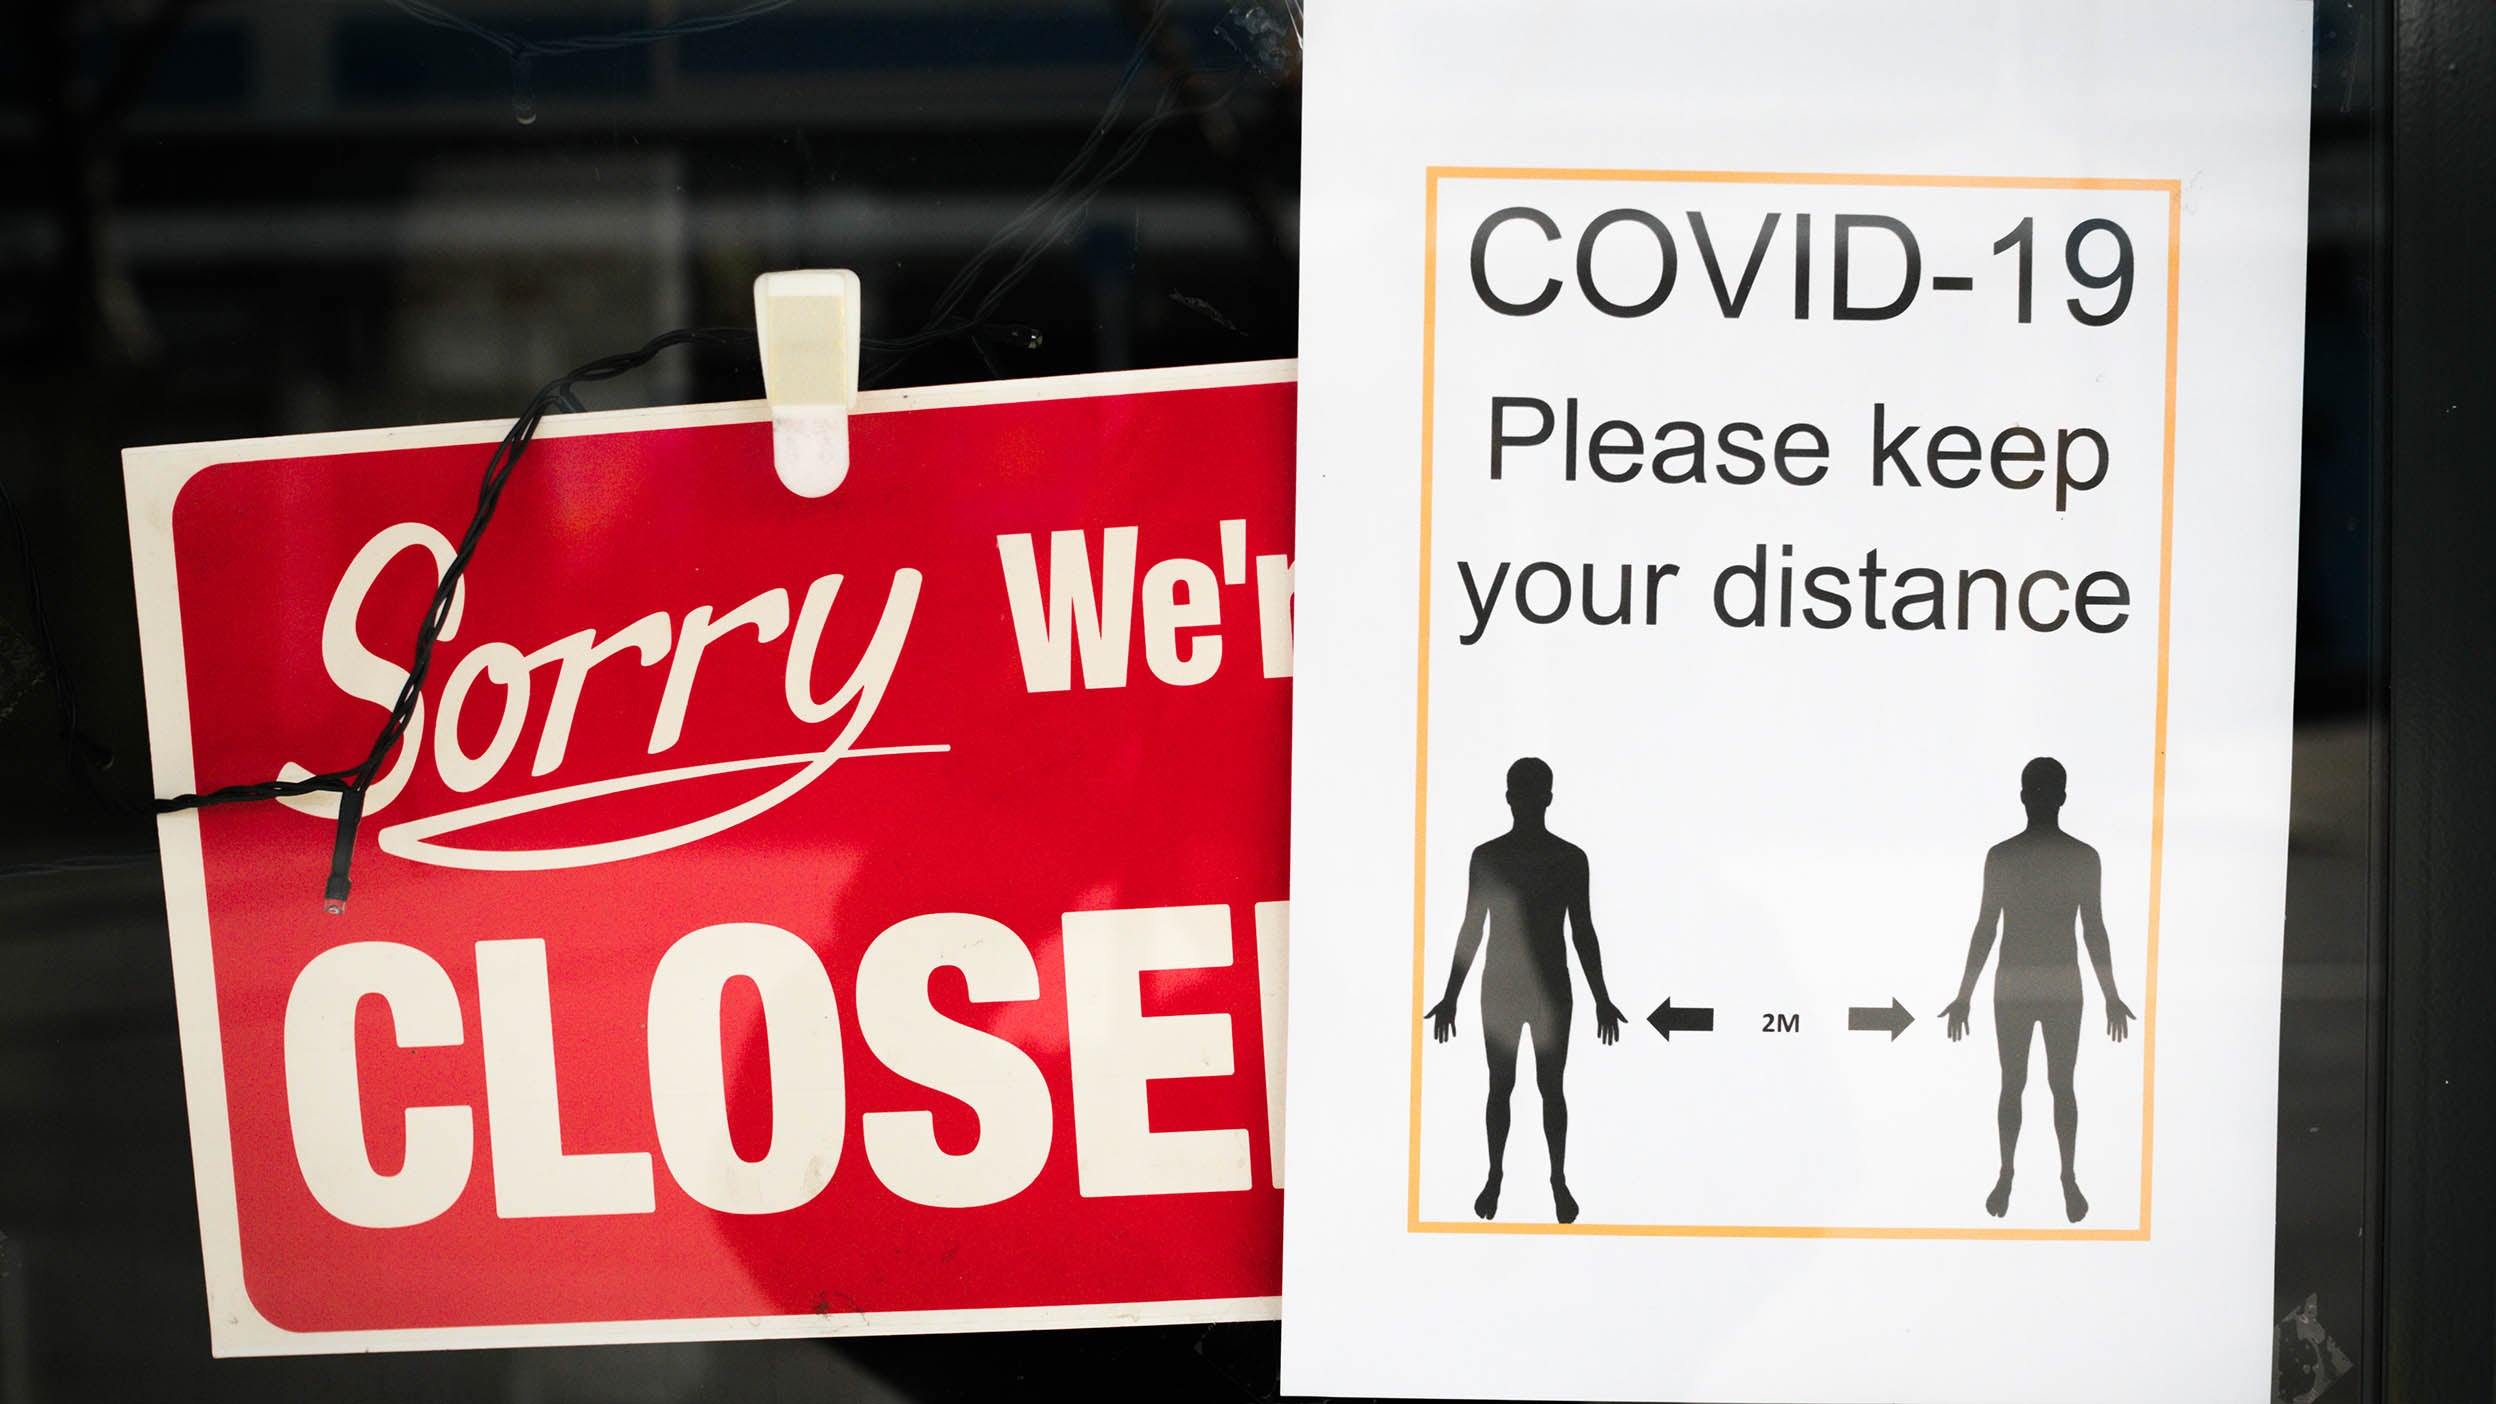 Signs in a store window saying that the shop is closed and to distance due to COVID.